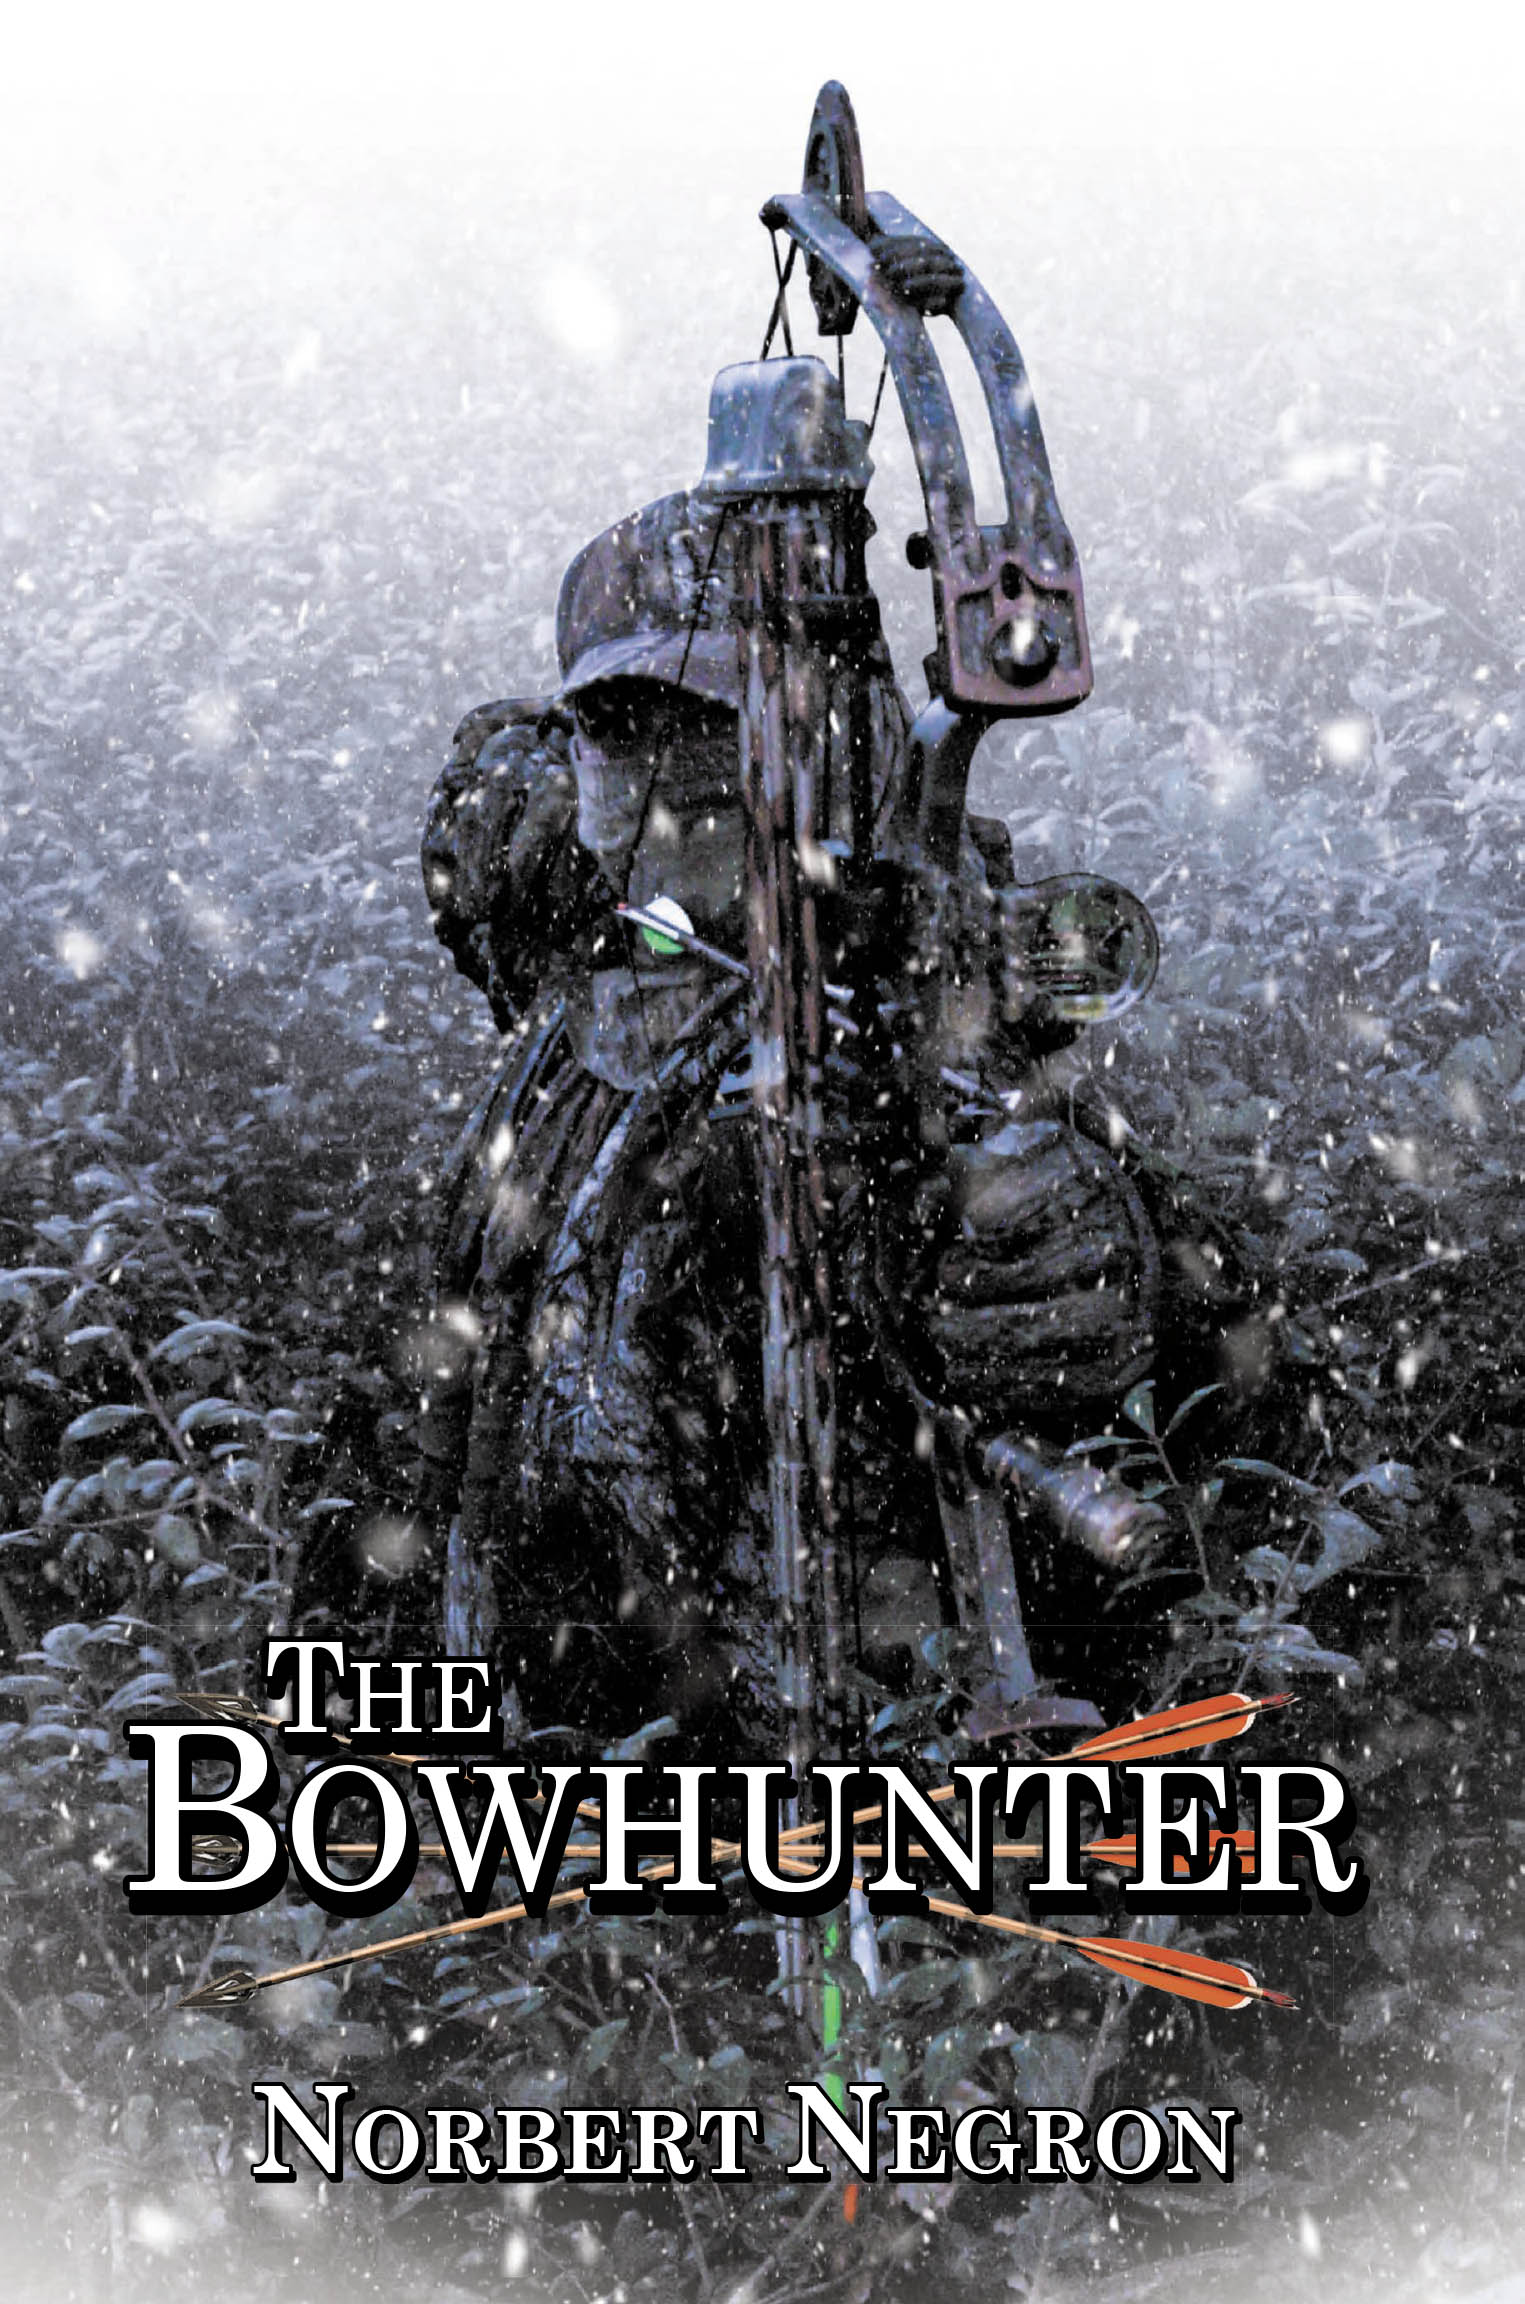 Norbert Negron’s Newly Released "The Bowhunter" is a Gripping and Patriotic Adventure Exploring Faith, Resilience, and the Fight Against Corruption